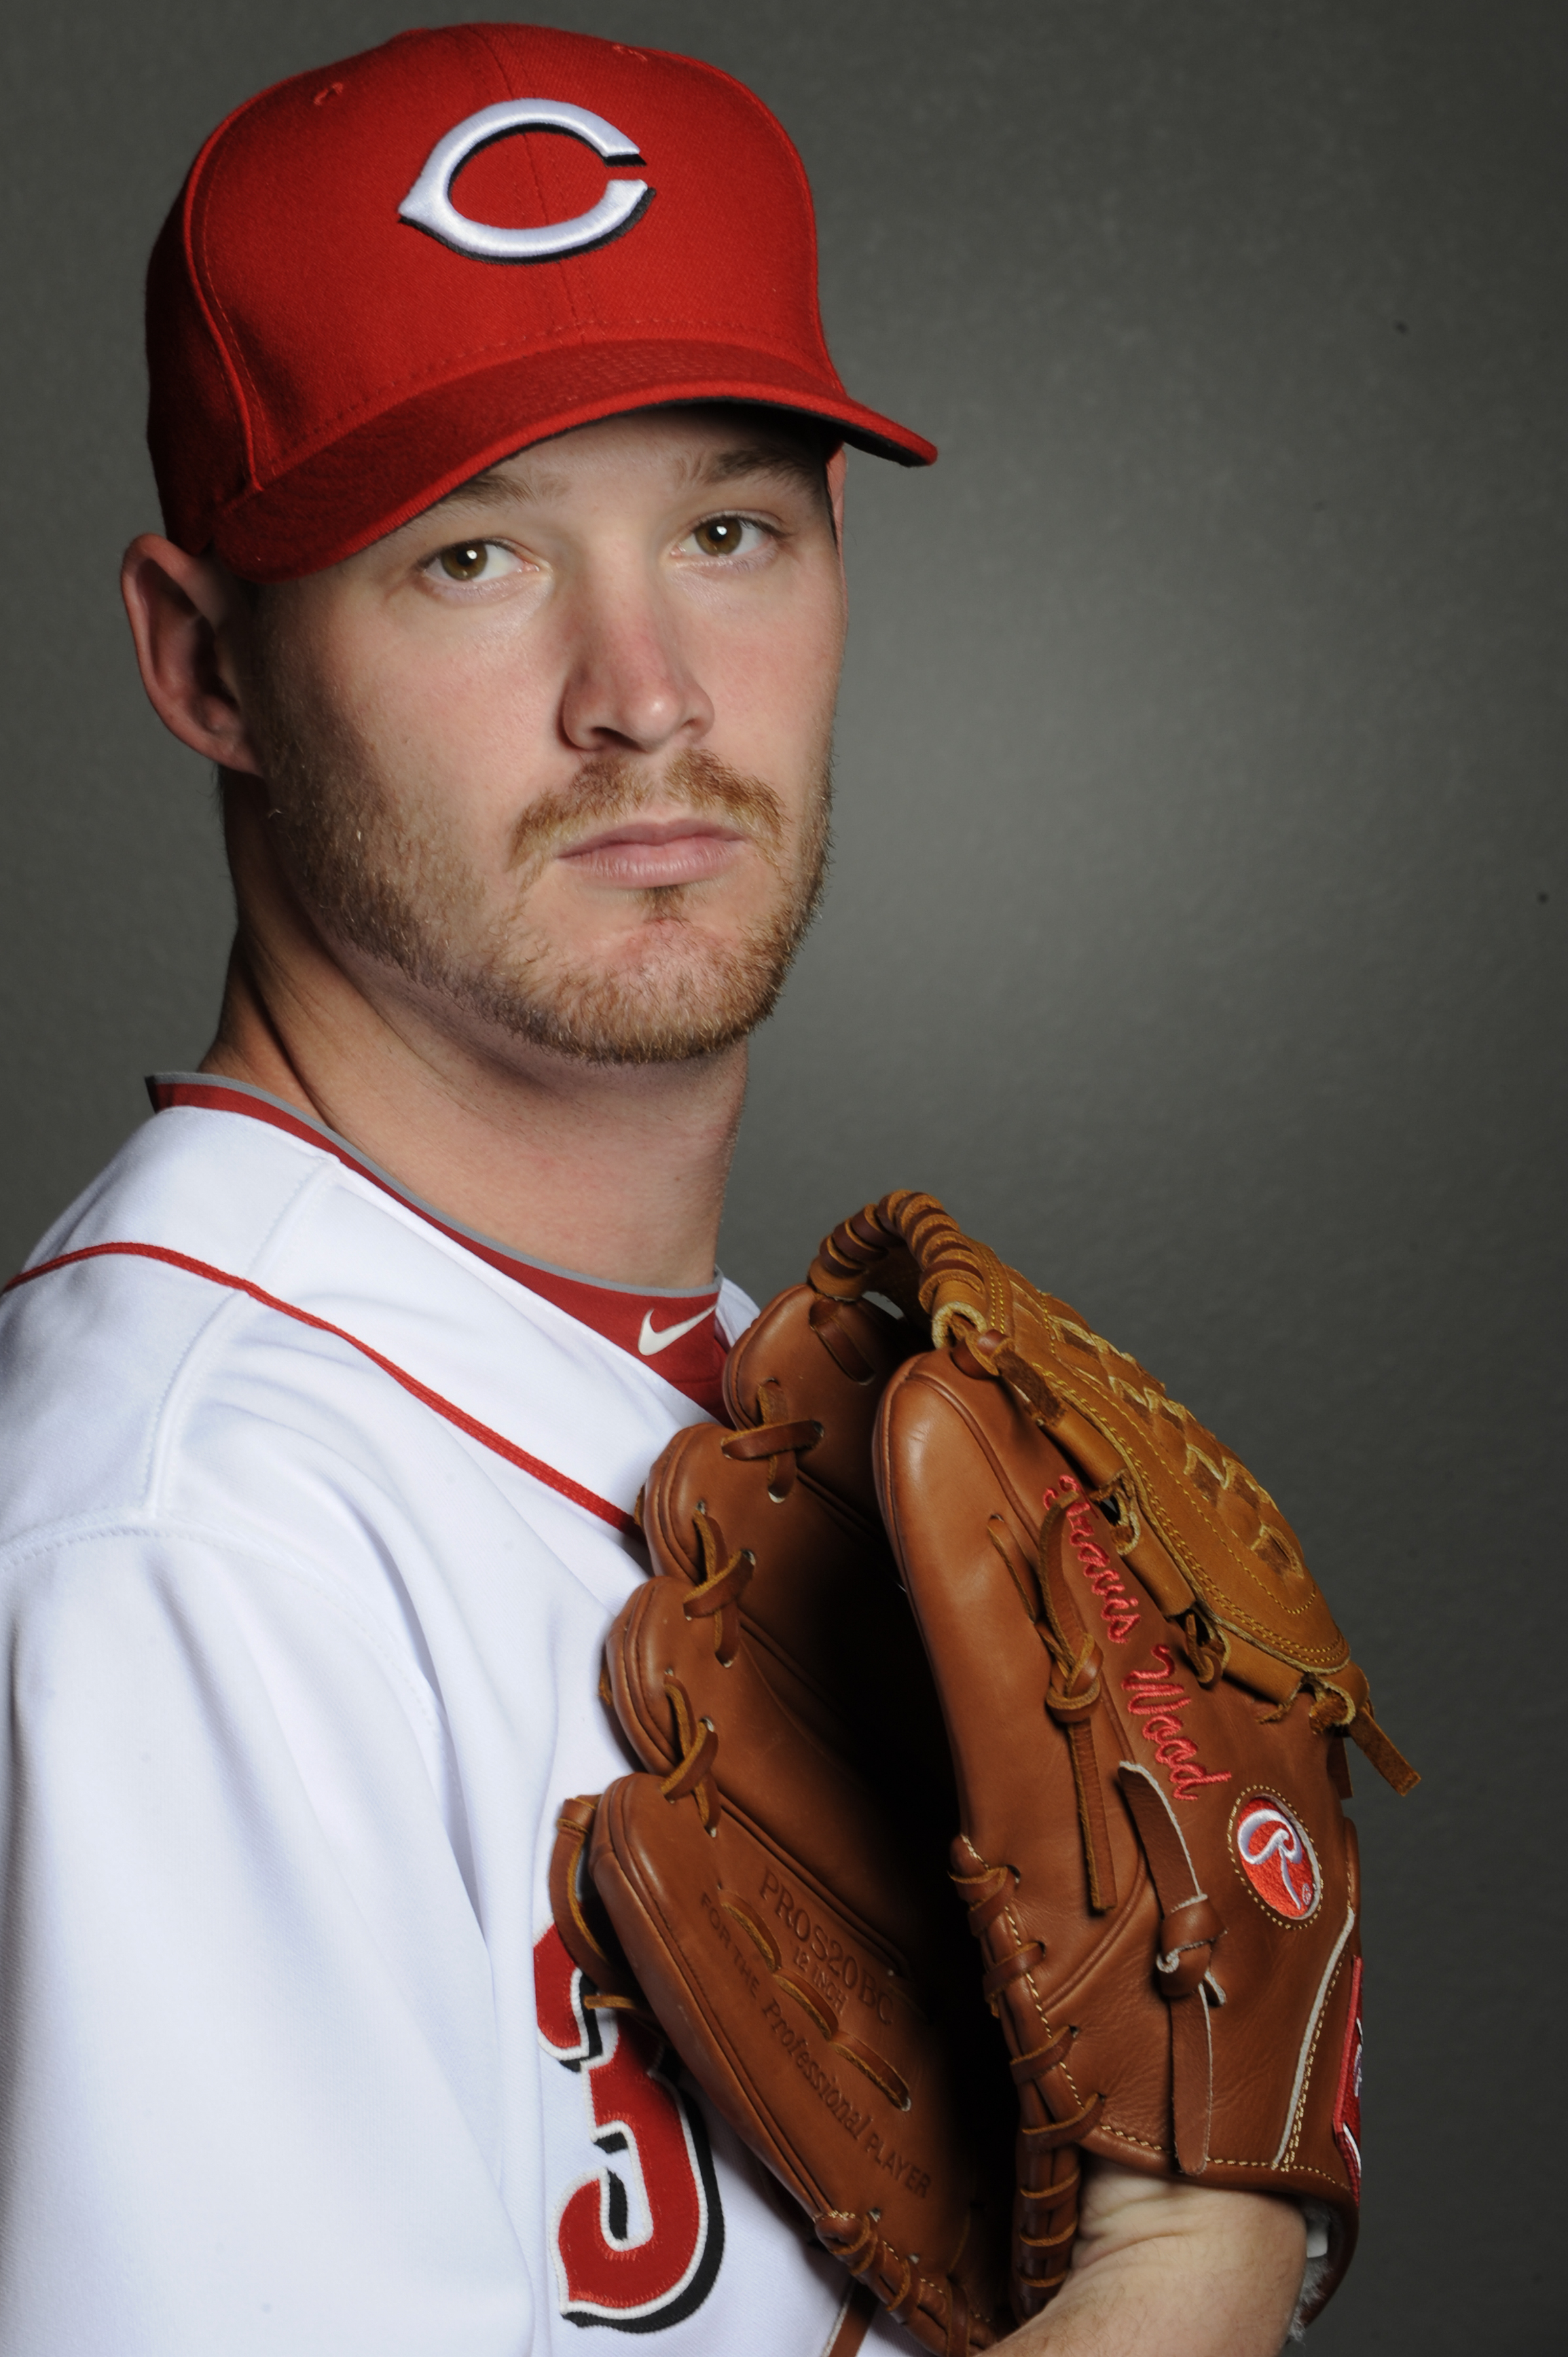 GOODYEAR, AZ - FEBRUARY 20: Travis Wood #30 of the Cincinnati Reds poses during the Cincinnati Reds photo day at the Cincinnati Reds Spring Training Complex on February 20, 2011 in Goodyear, Arizona. (Photo by Rob Tringali/Getty Images)